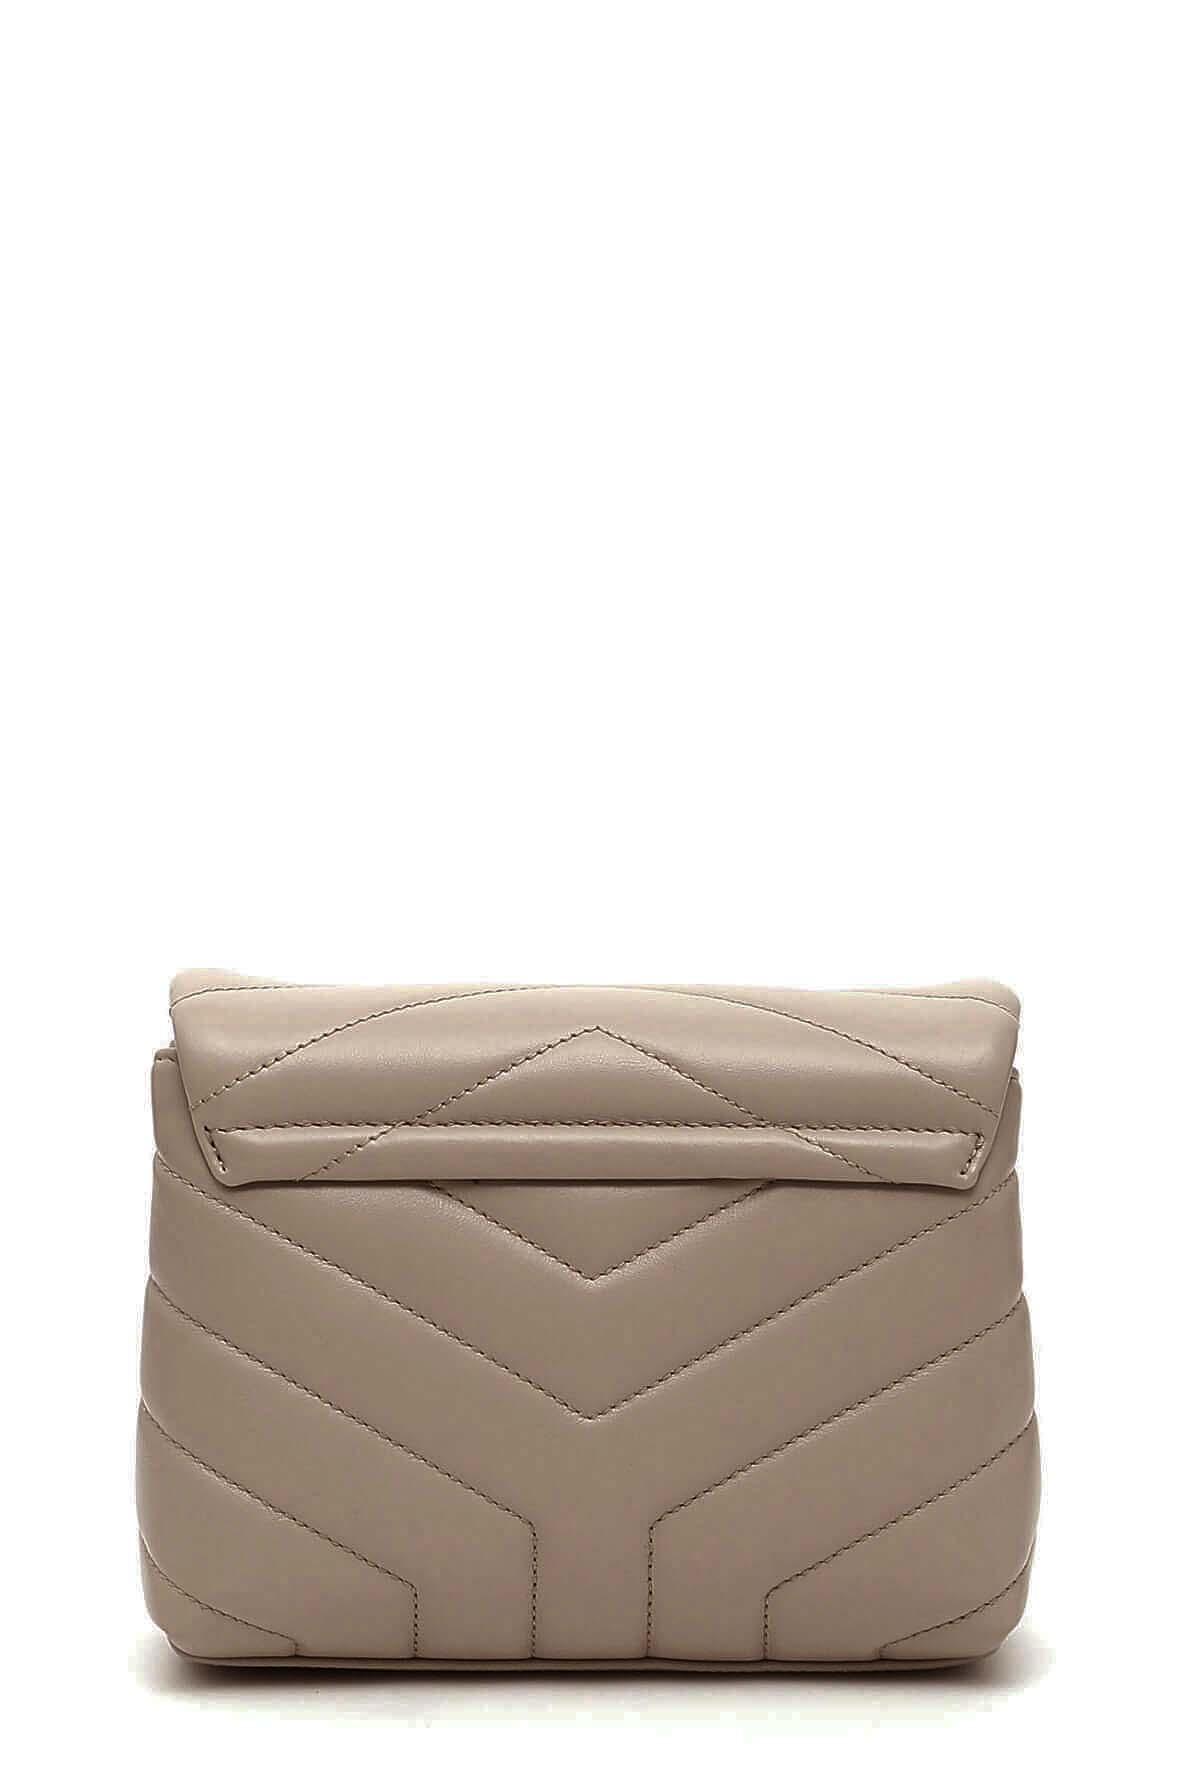 Saint Laurent Beige Quilted Toy Loulou Strap Bag in Natural